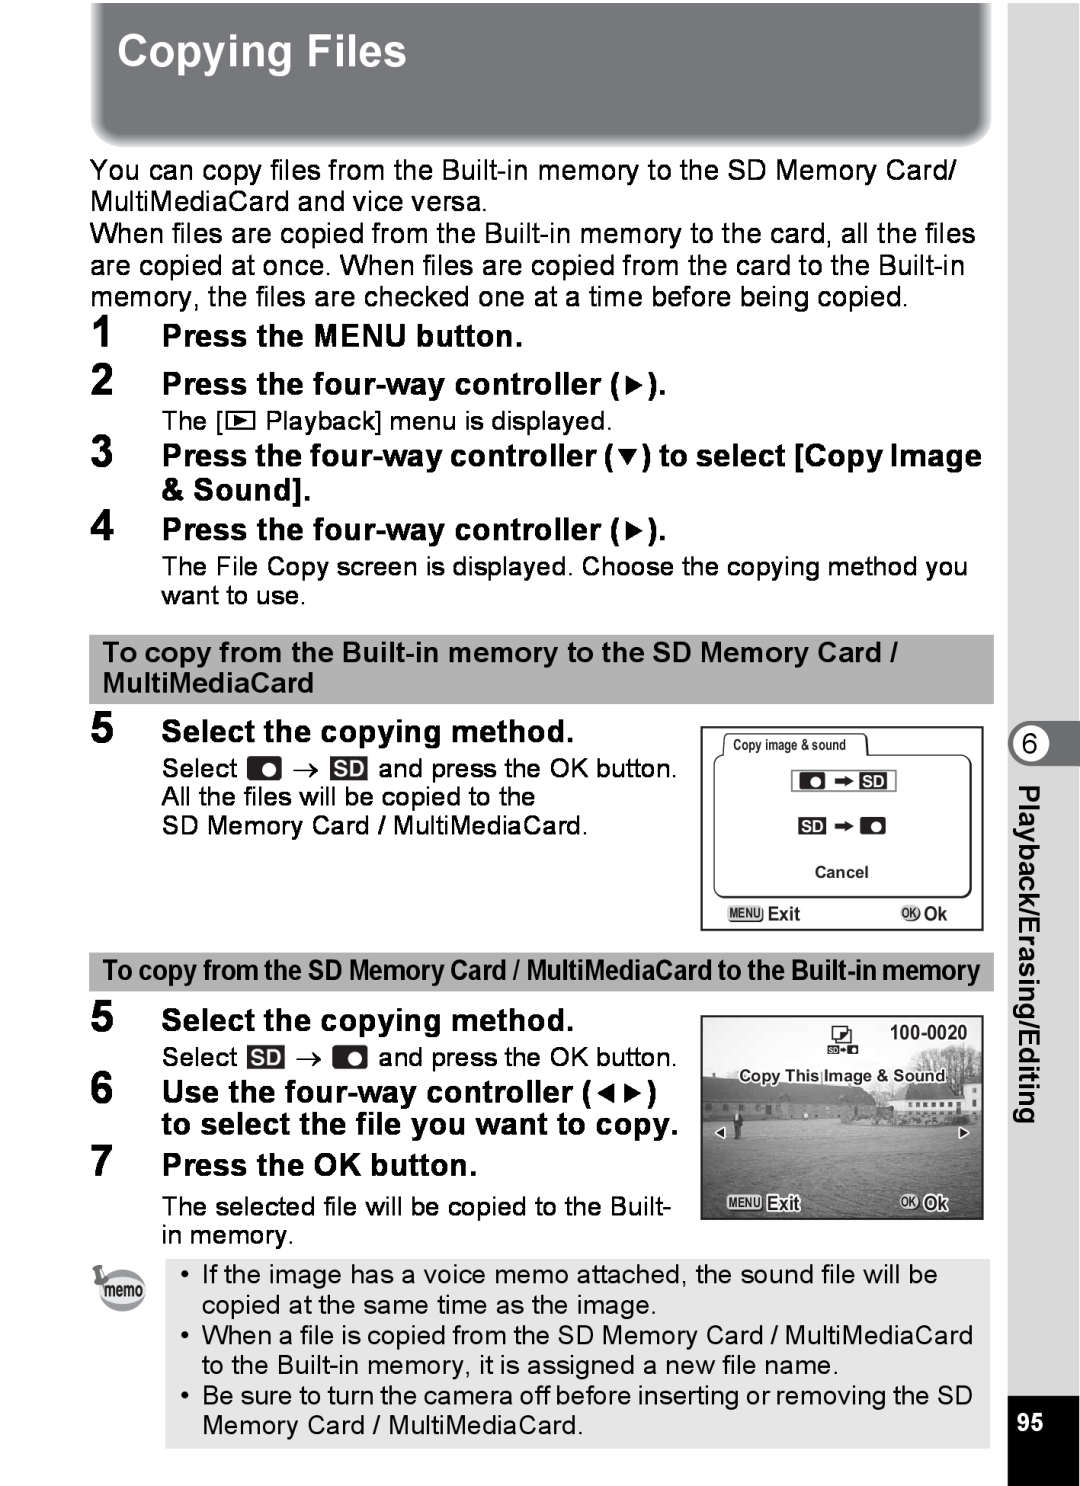 Pentax S4 manual Copying Files, Press the MENU button Press the four-way controller, Select the copying method, in memory 